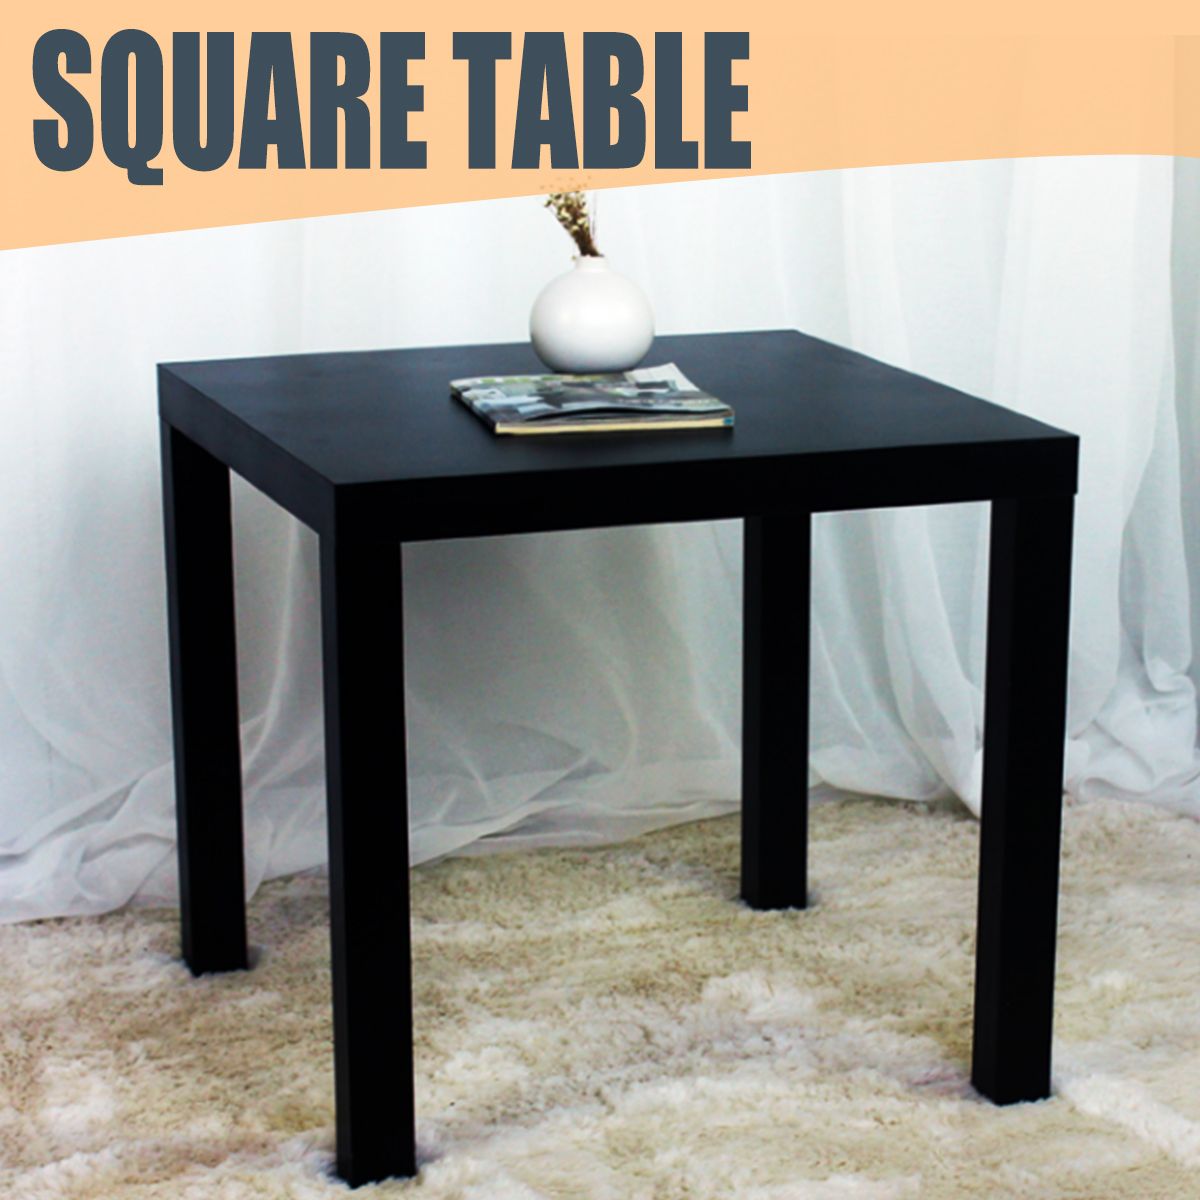 45x45x43cm-Black-Wooden-Square-Coffee-Tea-Bedside-Table-1544902